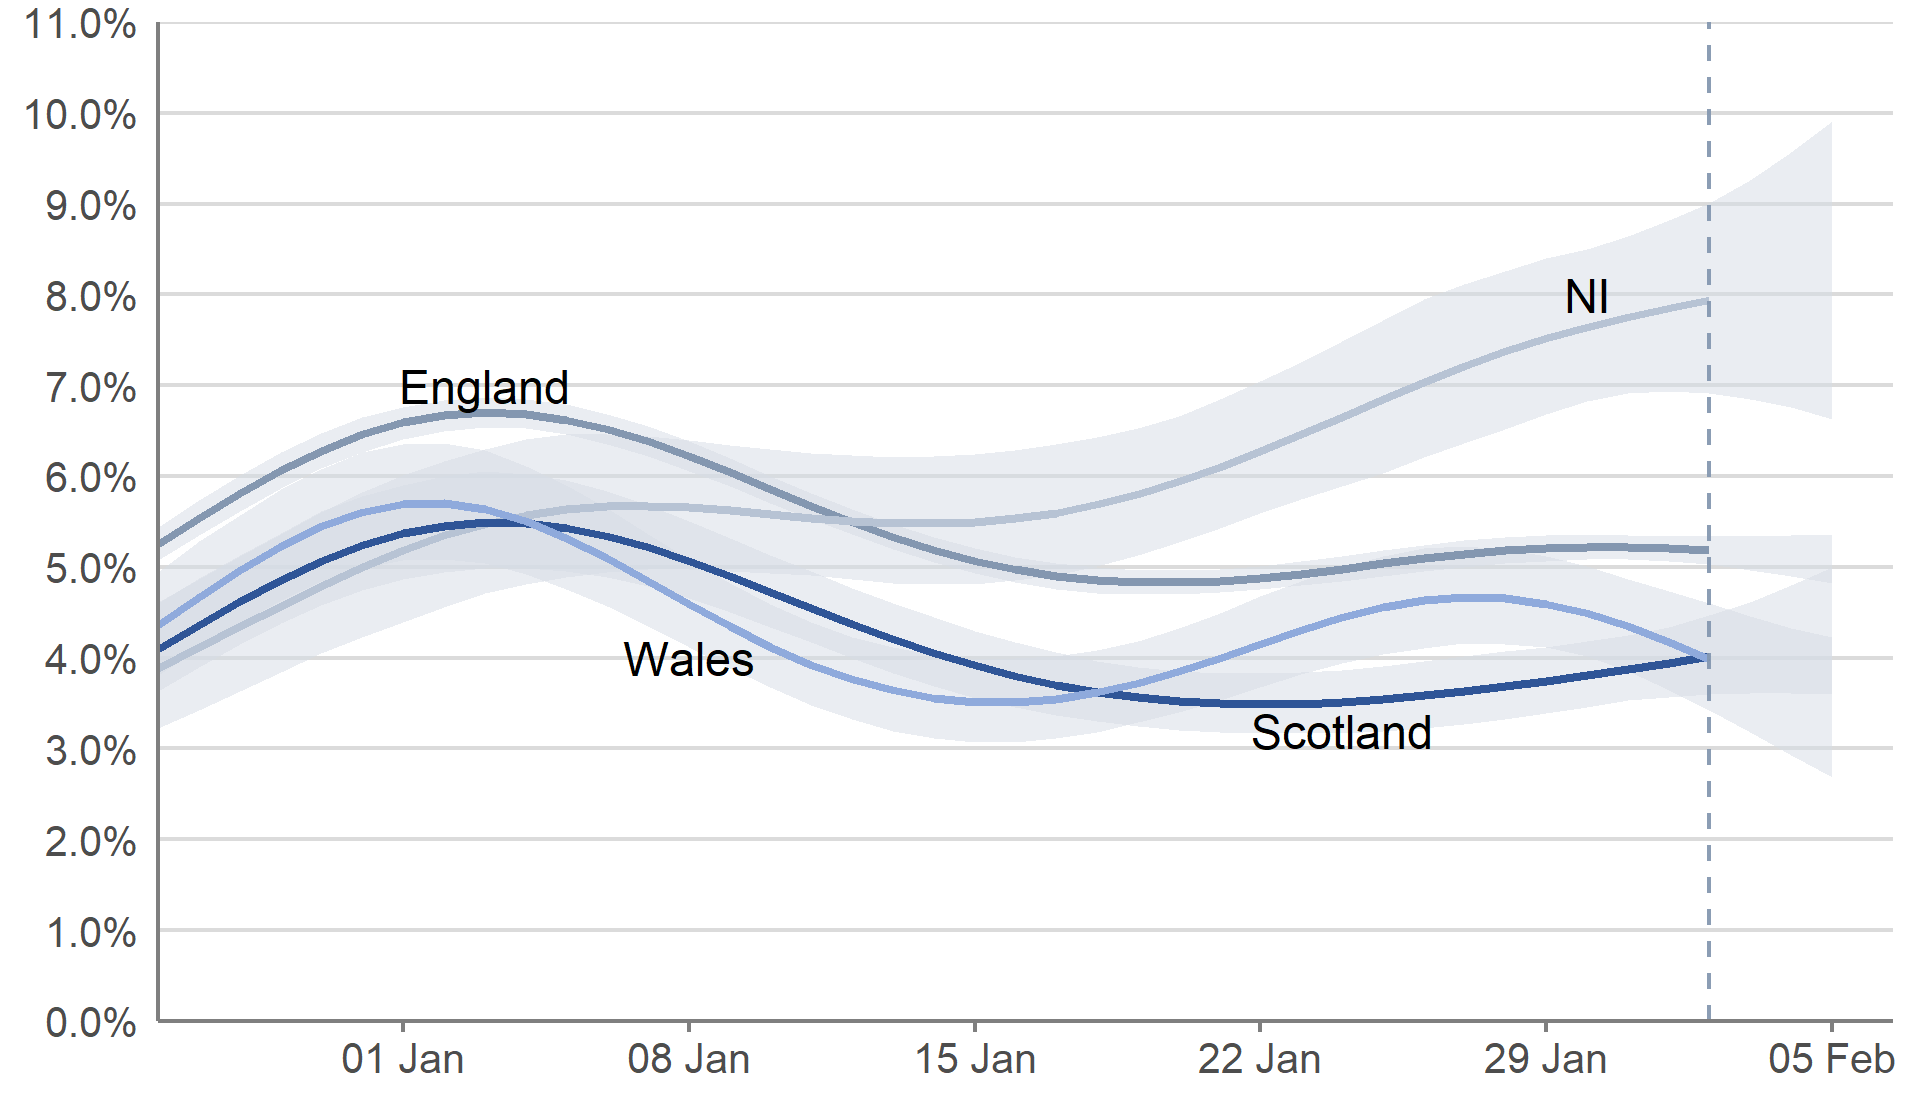 In England, the estimated percentage of people testing positive for COVID-19 has increased in the most recent two weeks, however the trend is uncertain for the most recent week. In the same week, the estimated percentage of people testing positive has decreased in Wales, continued to increase in Northern Ireland, and increased in Scotland.